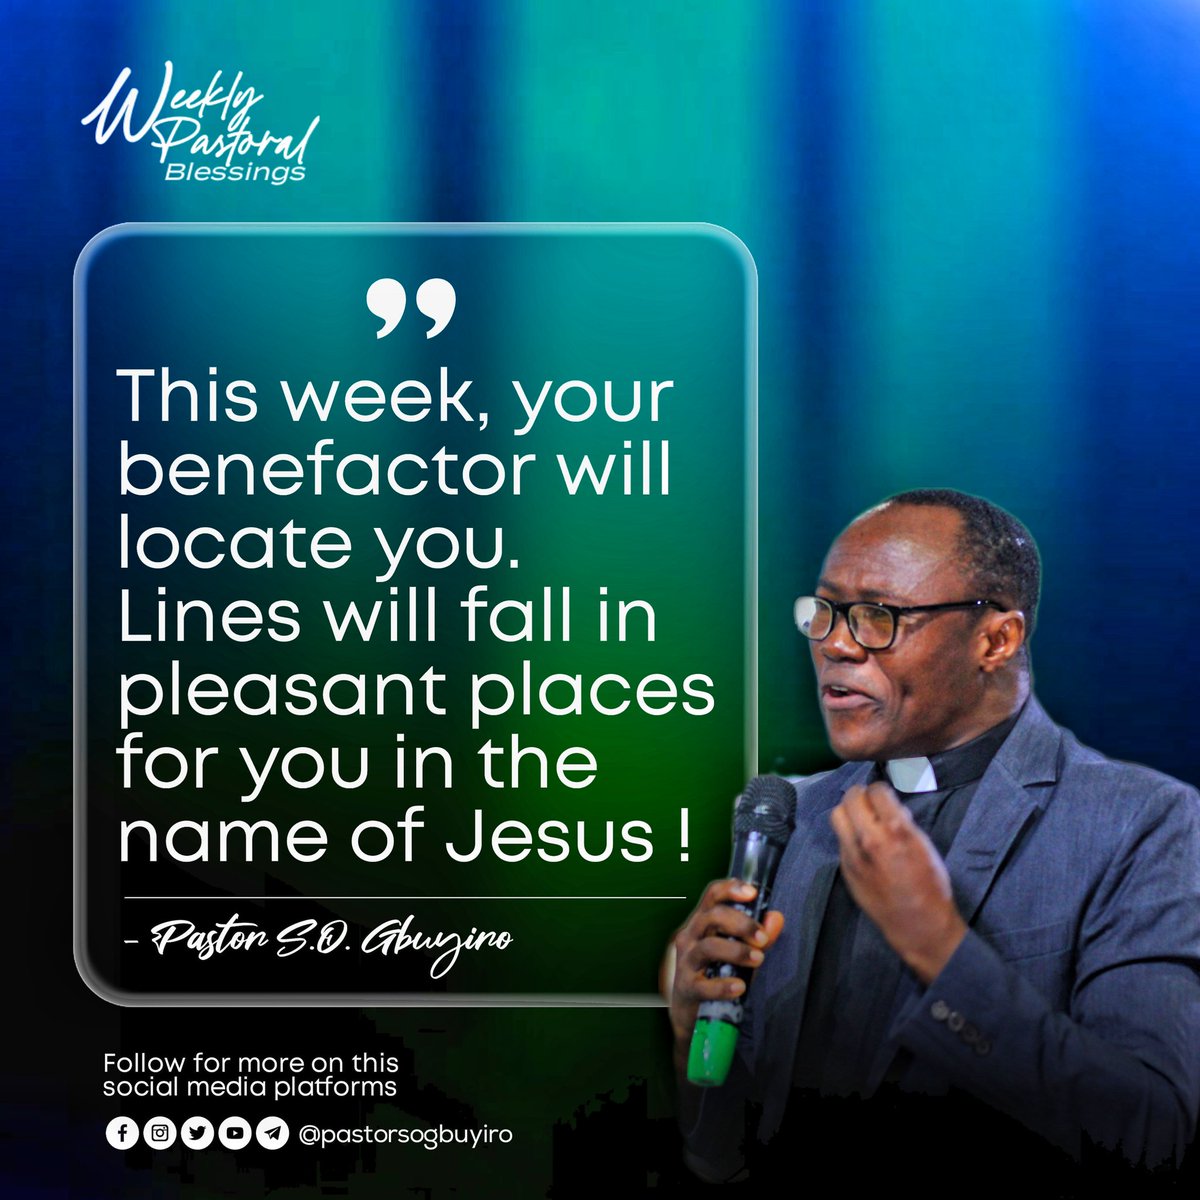 This week, your benefactor will locate you. Lines will fall in pleasant places for you in the name of Jesus !

#weeklypastoralblessings
#newweekblessings
#pastorsogbuyiro
#cacyouthdirector
#cacnigeriaandoverseas